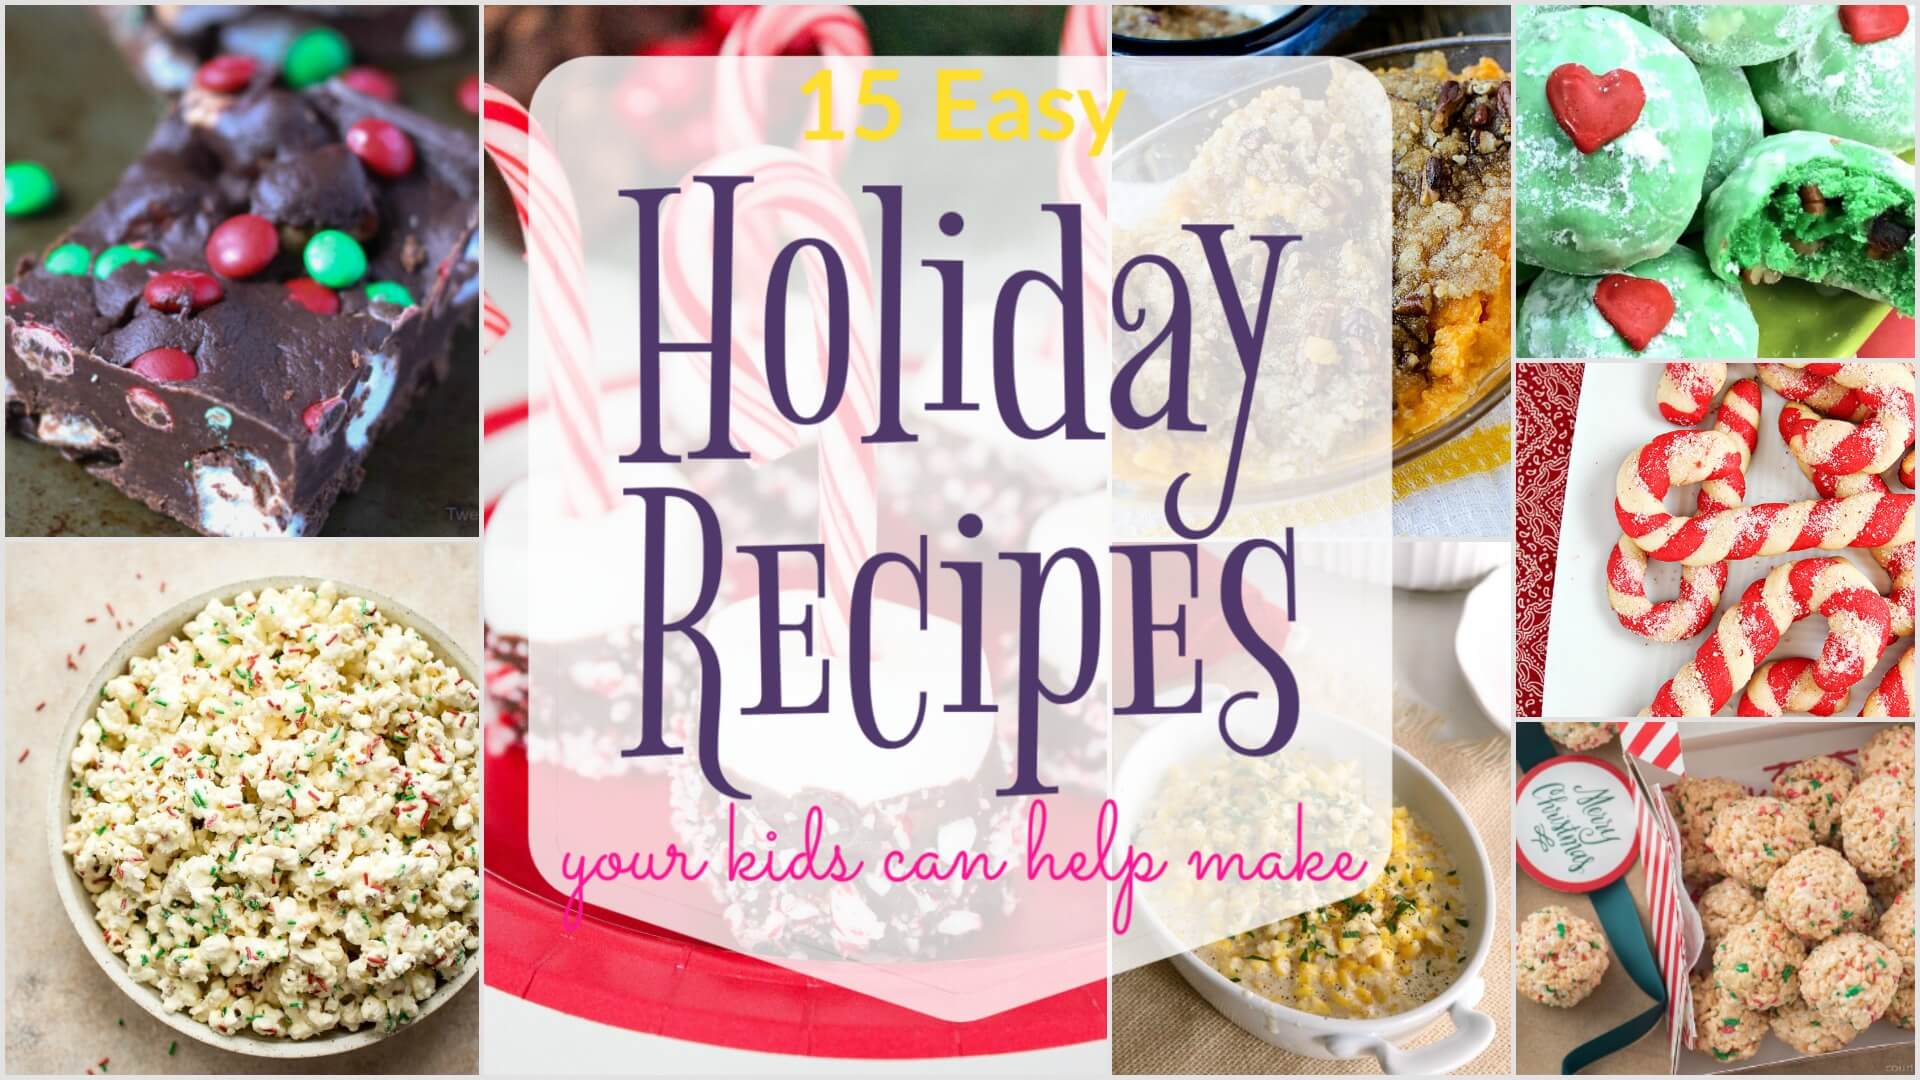 10 Easy Holiday Recipes For Beginners!